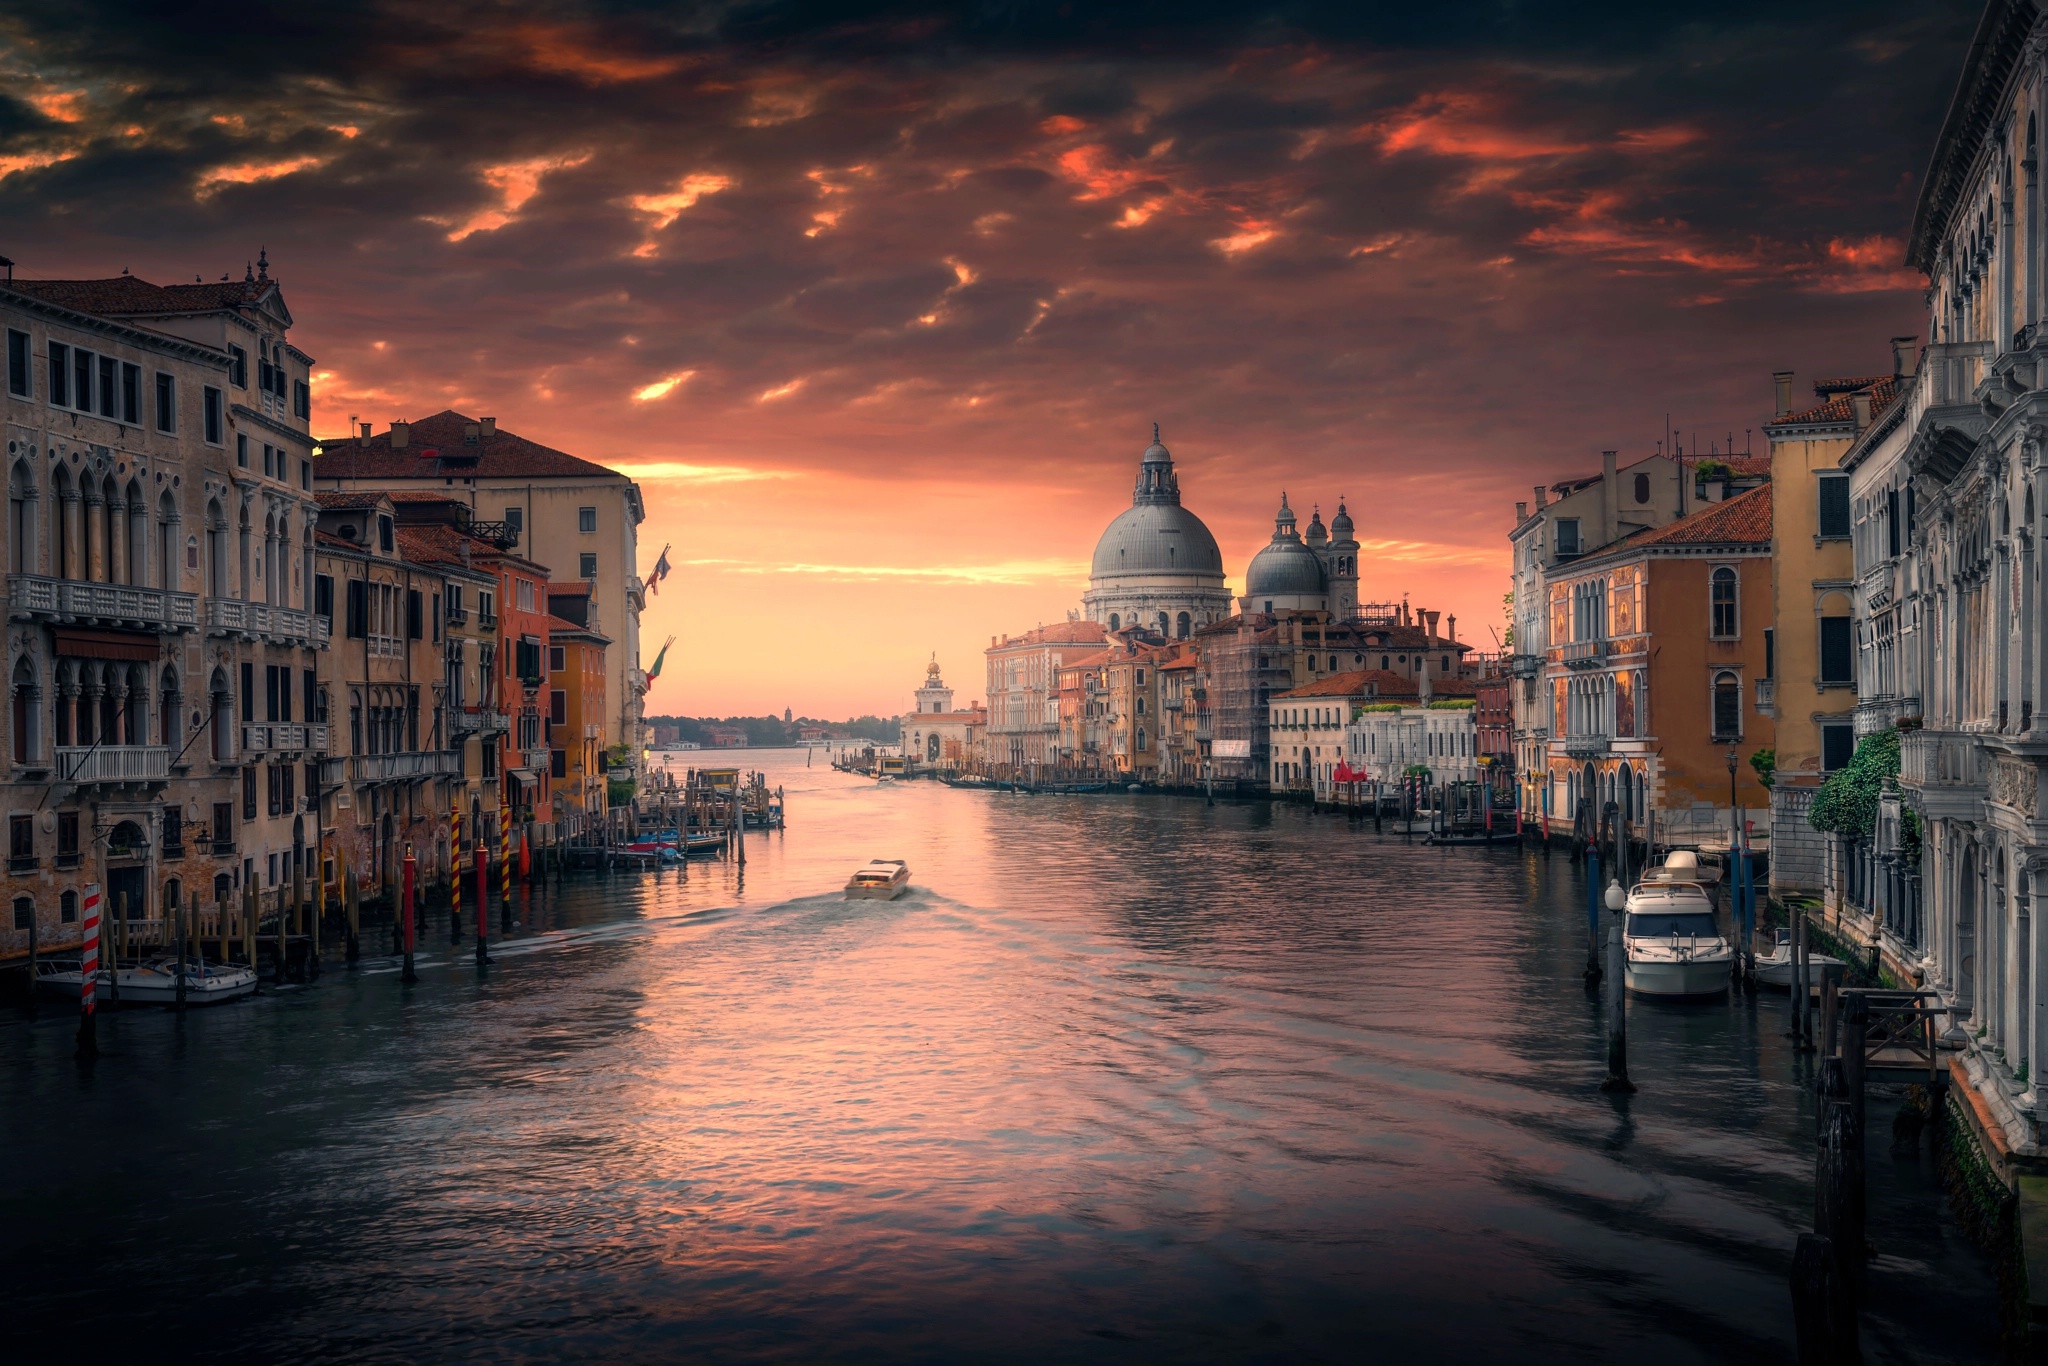 italy, man made, venice, building, city, cloud, dome, grand canal, cities